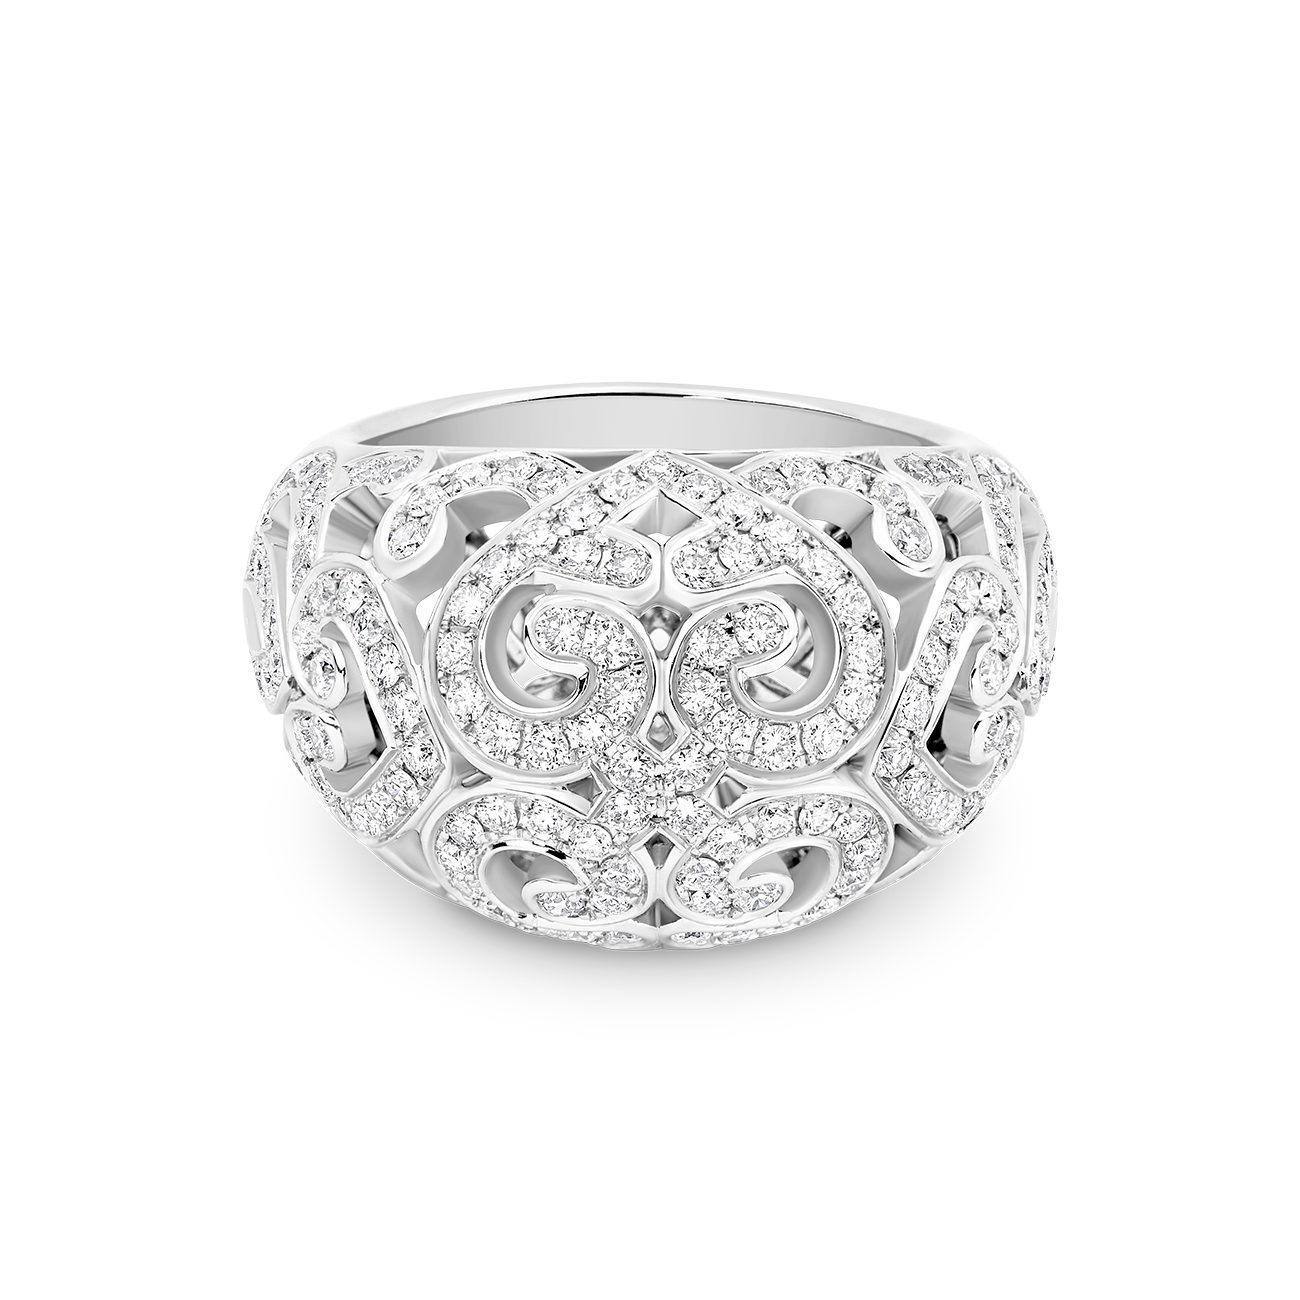 18K White Gold Round Brilliant Diamond Pave High Dome Fancy Cocktail Ring